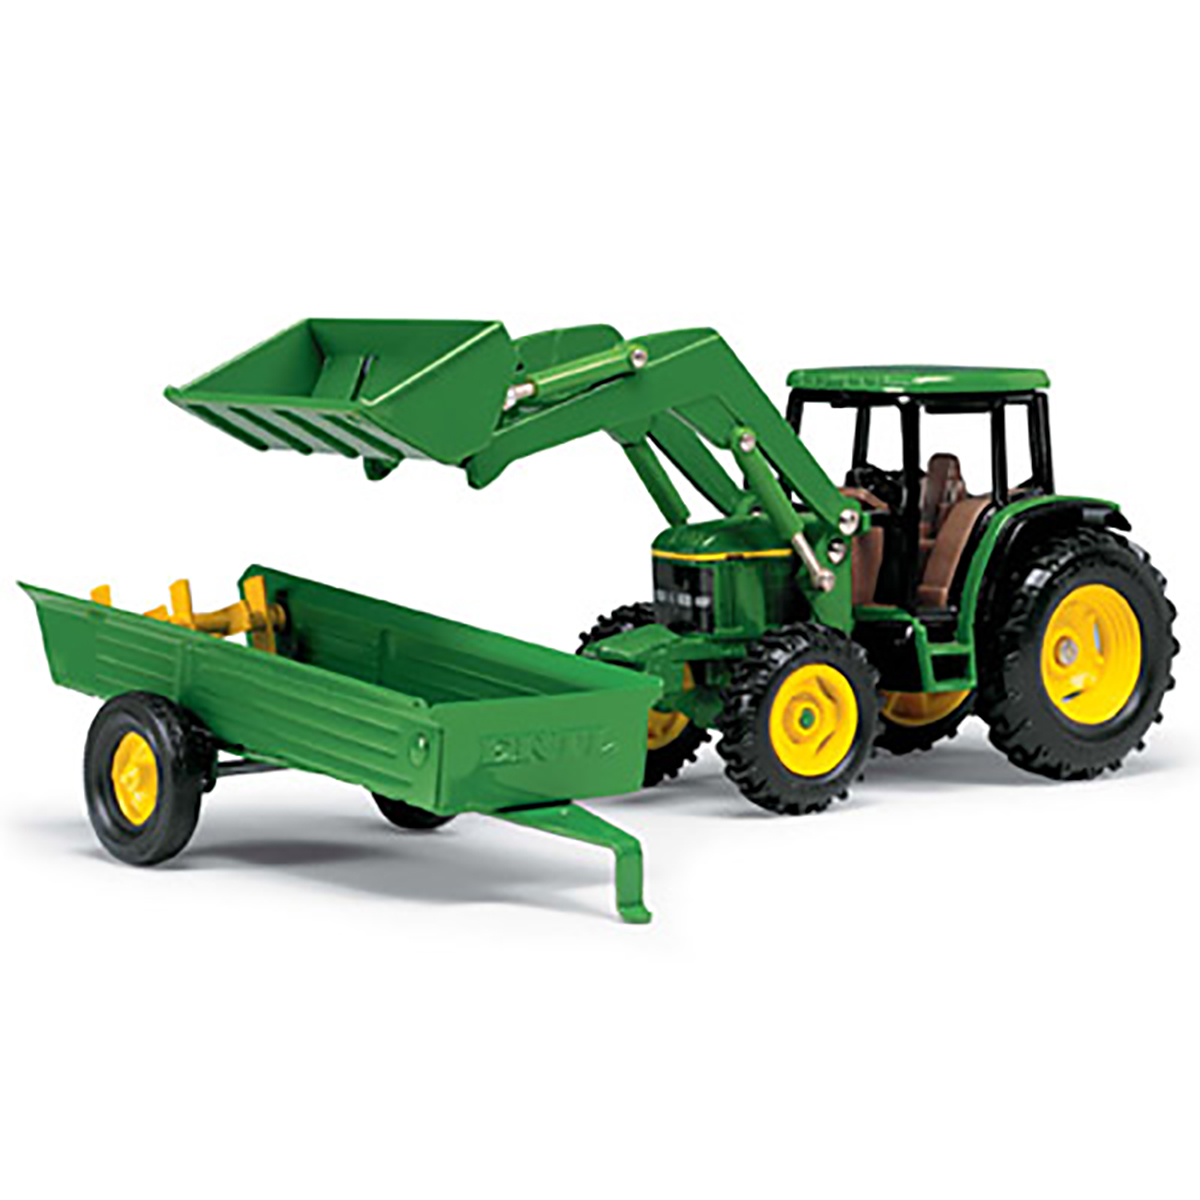 1/32 M6 6210 Tractor with Loader and Spreader